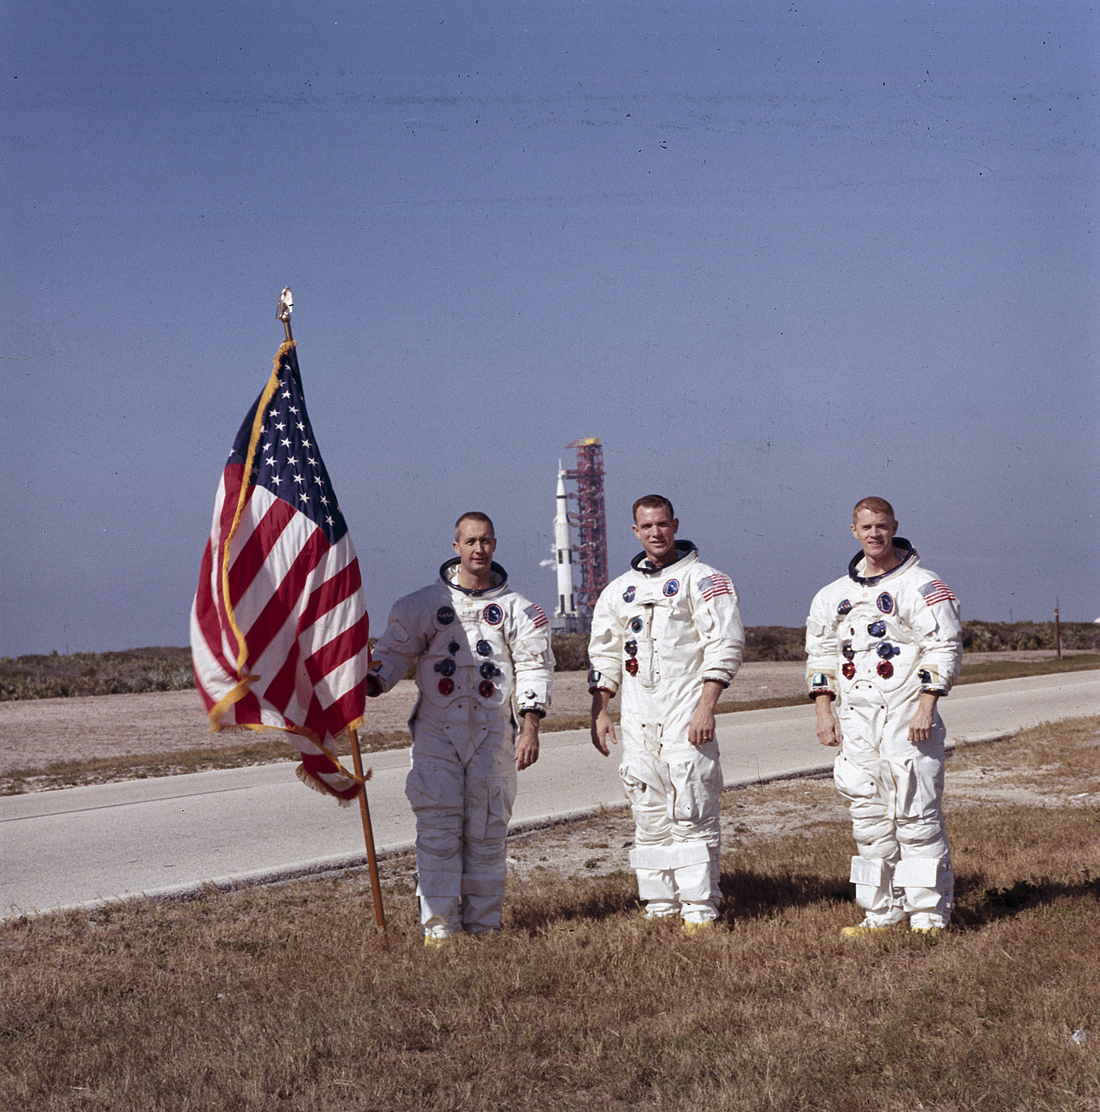 Three astronauts, one holding American flag, with Apollo 9 spacecraft in background